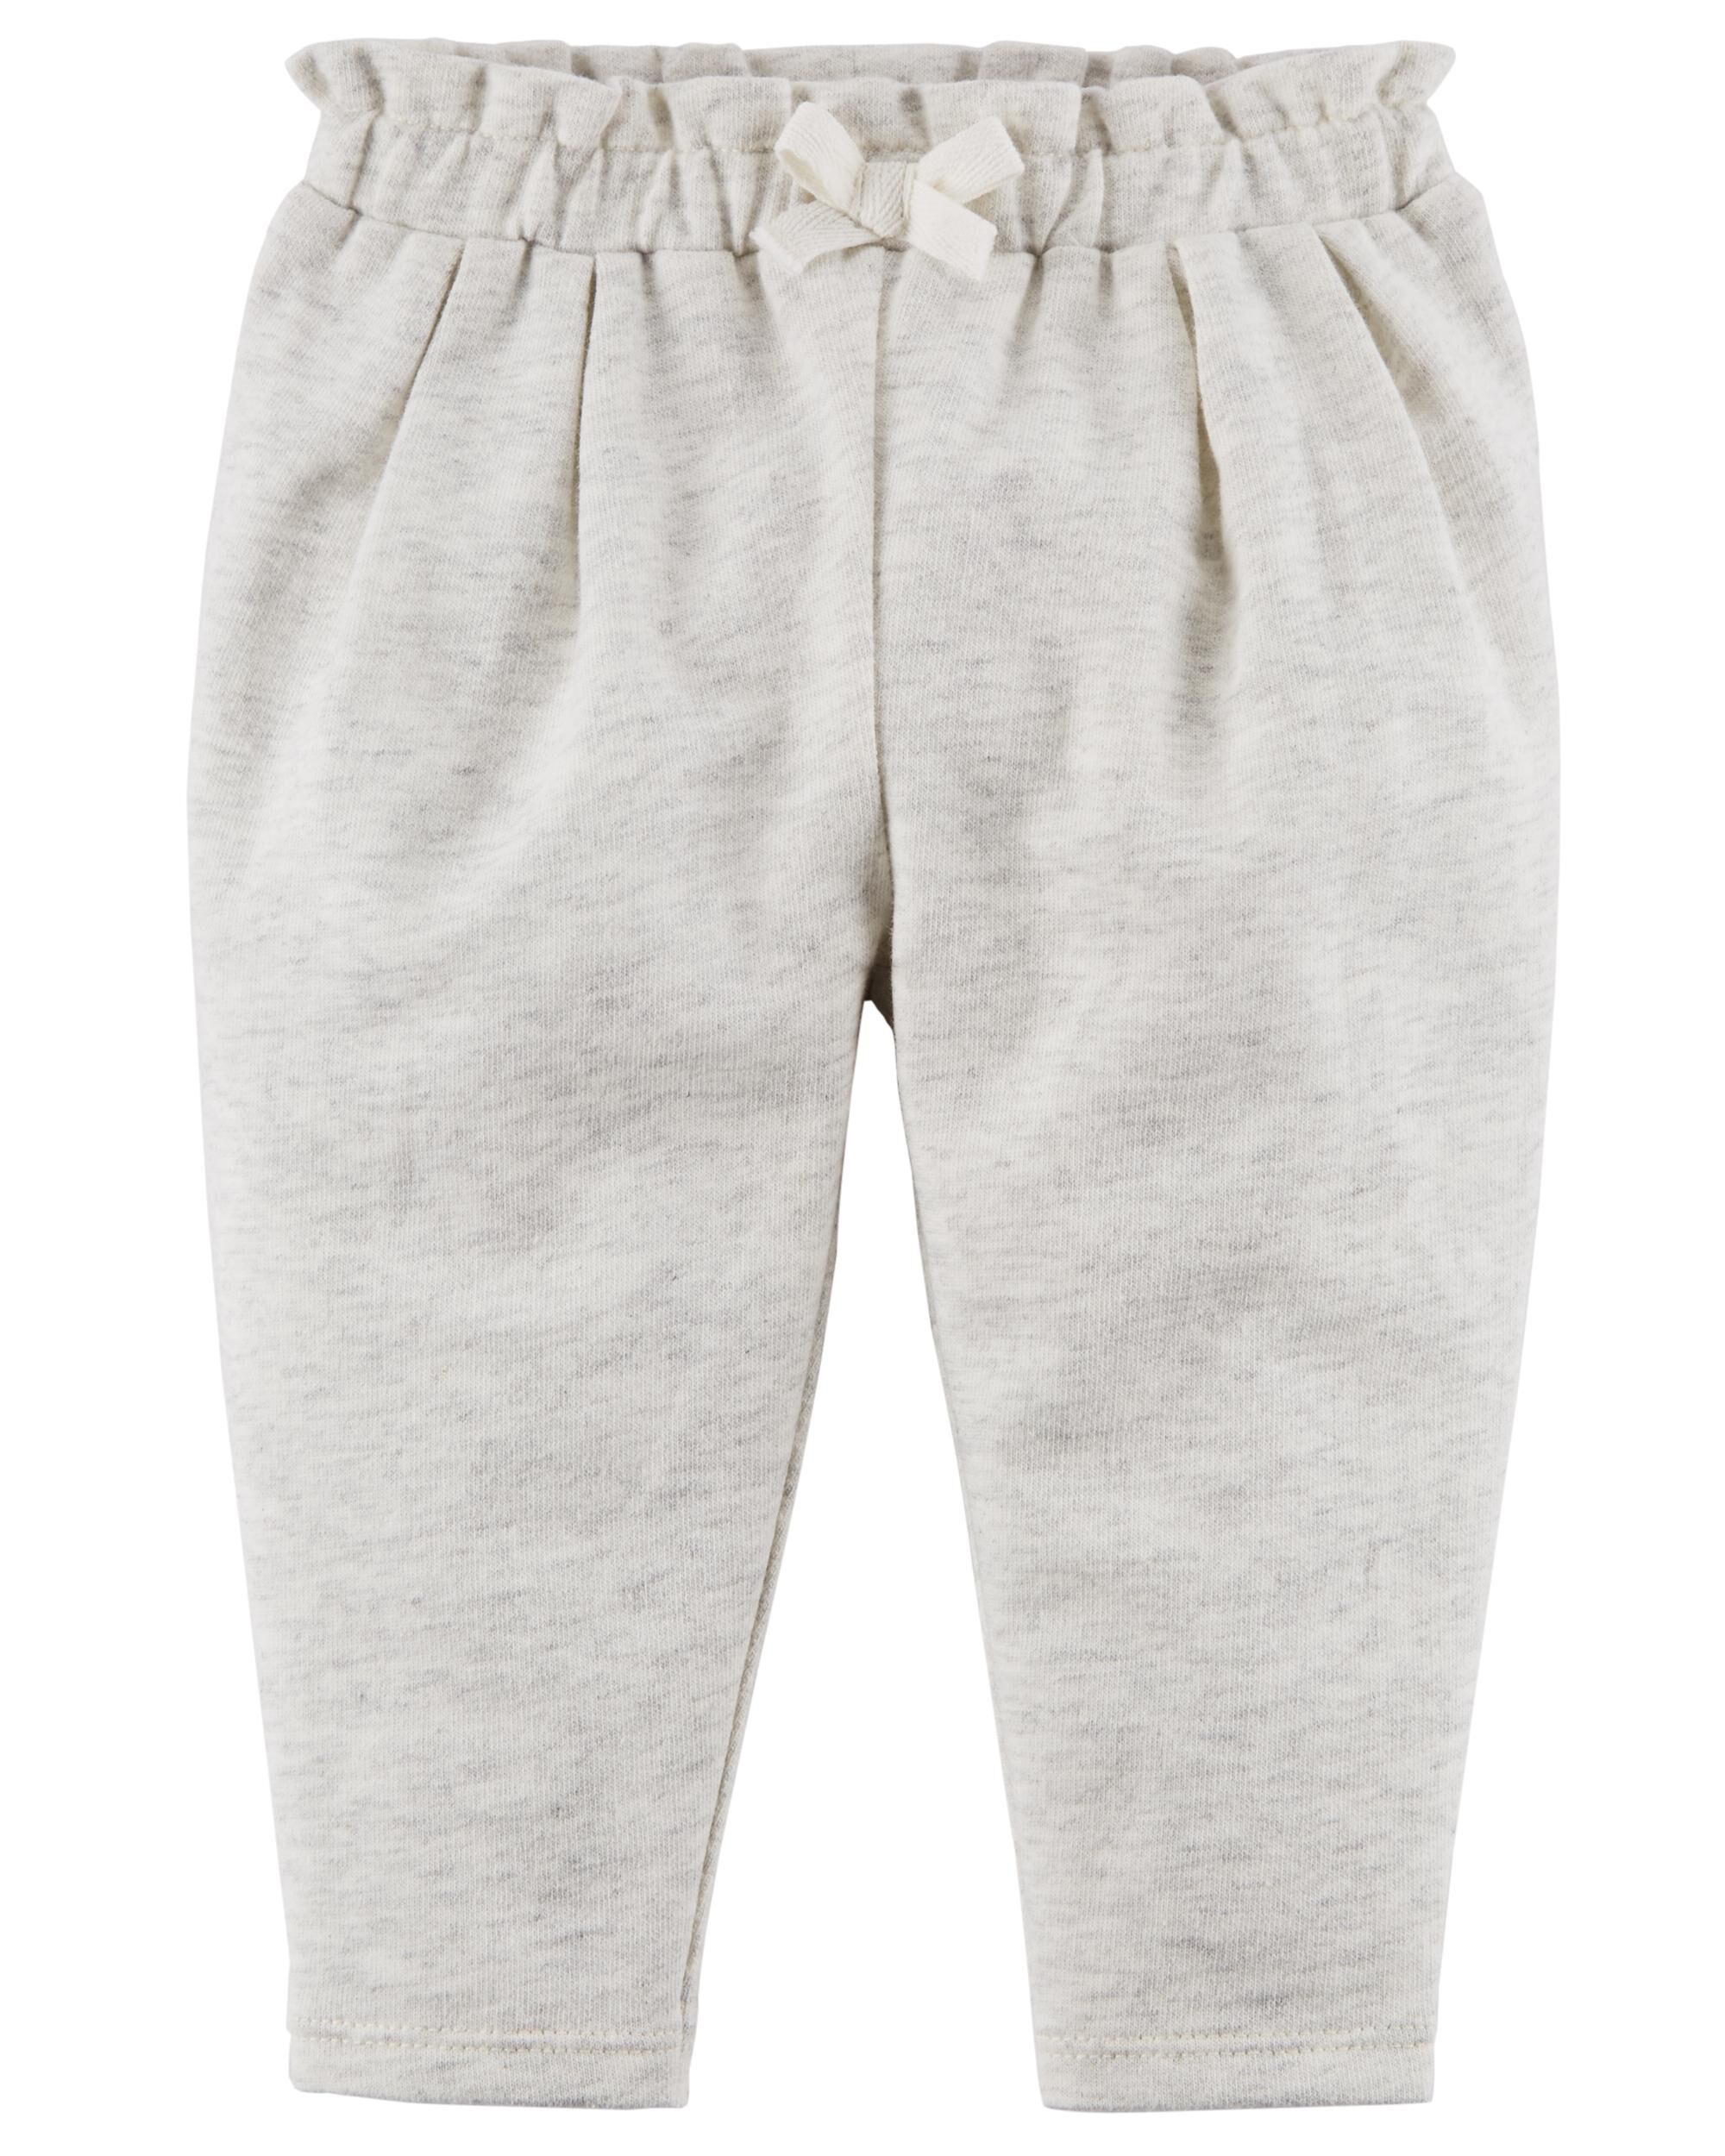 French Terry Ruffle Pants | carters.com